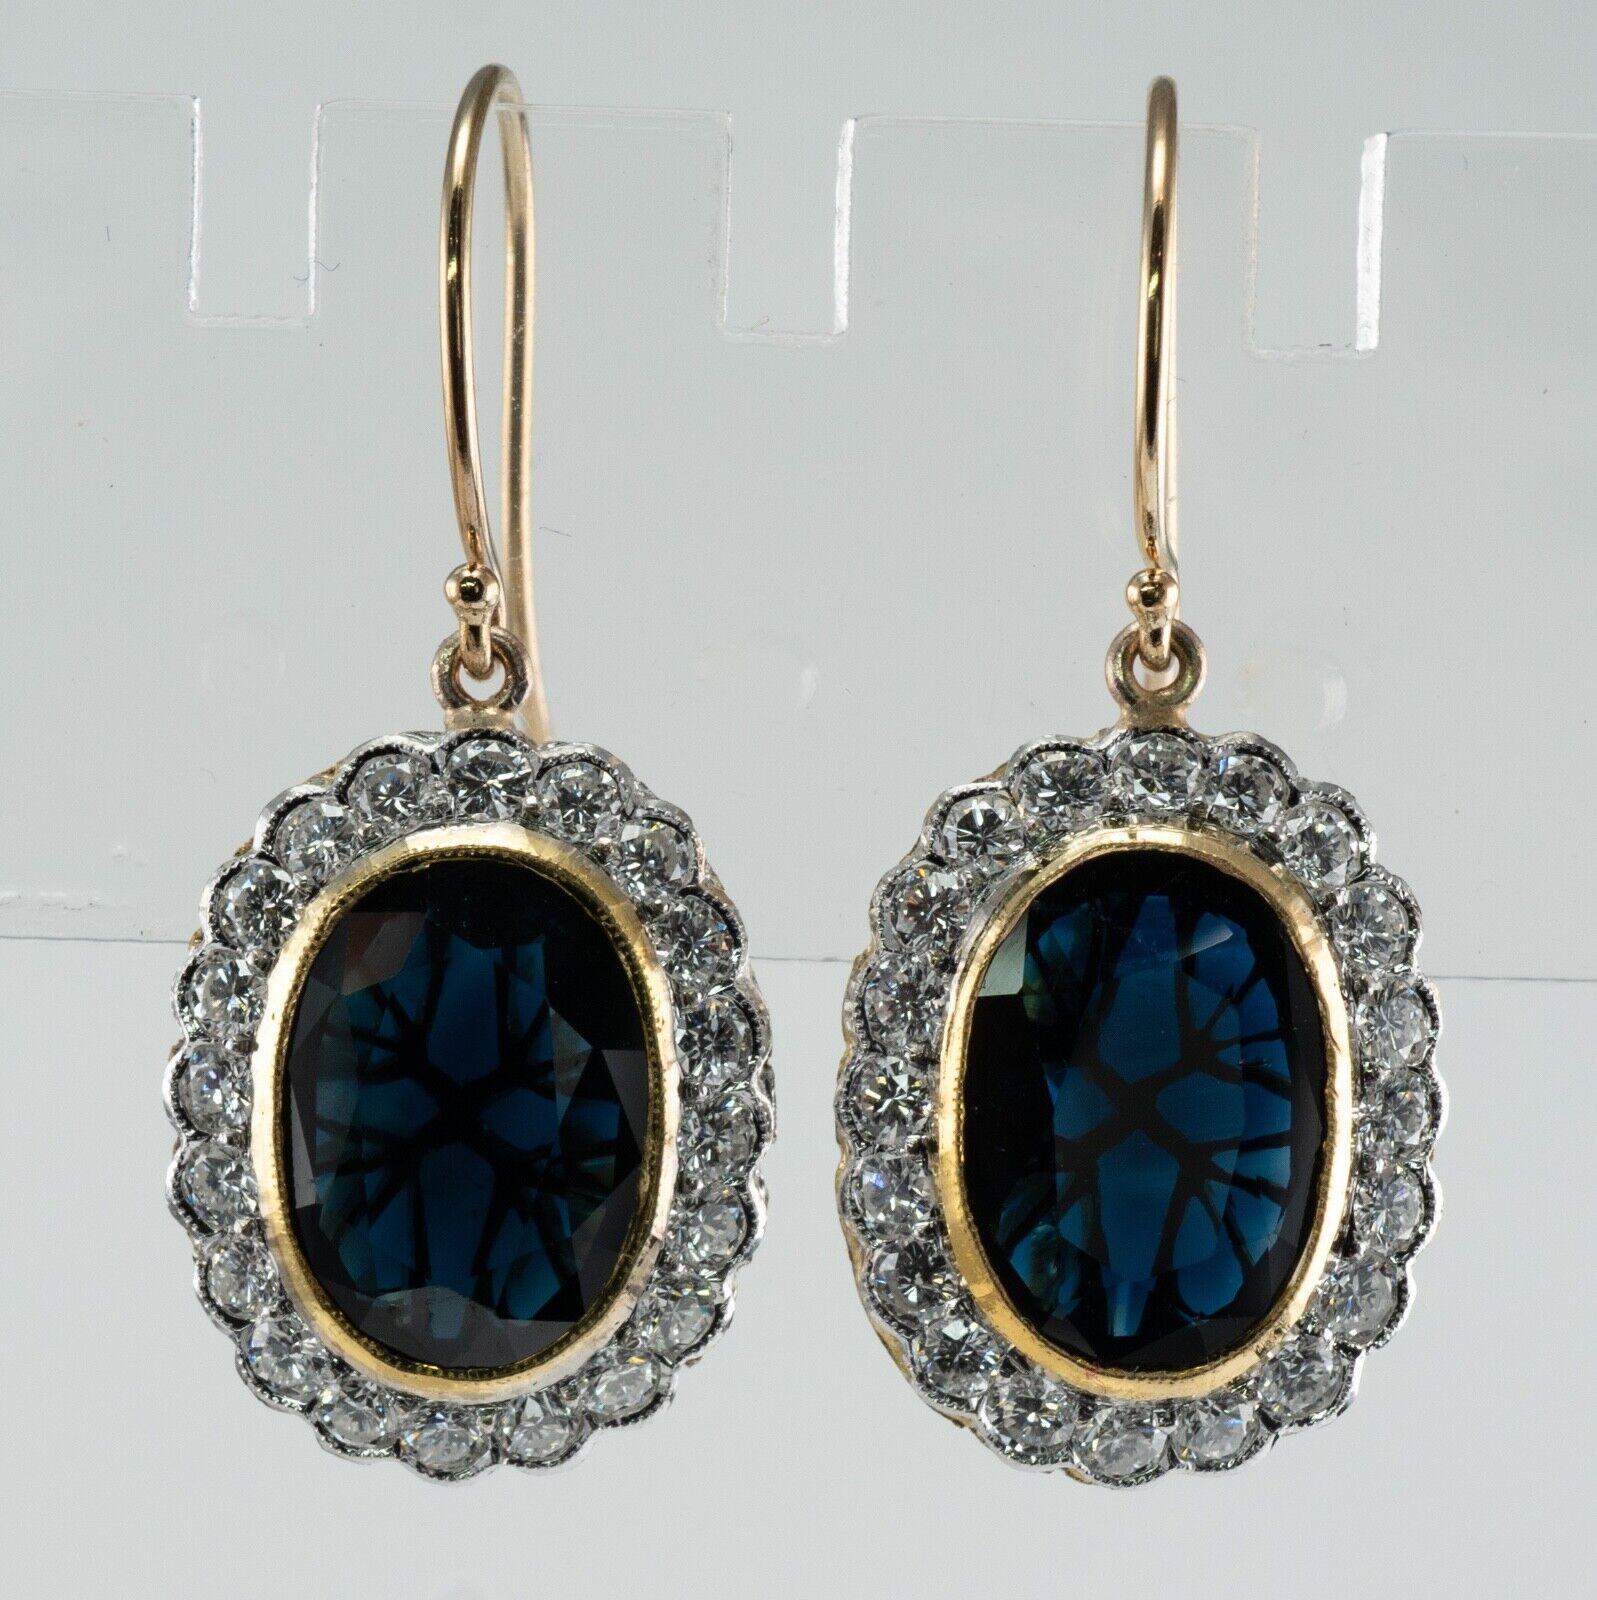 This vintage pair of earrings is crafted in solid 14K Yellow Gold (stamped on the hook backs).
The center oval cut Sapphires measure 11x9mm totaling 7.60 carats for the pair.
The sapphires are very intense blue in color.
One gem has a tiny chip on